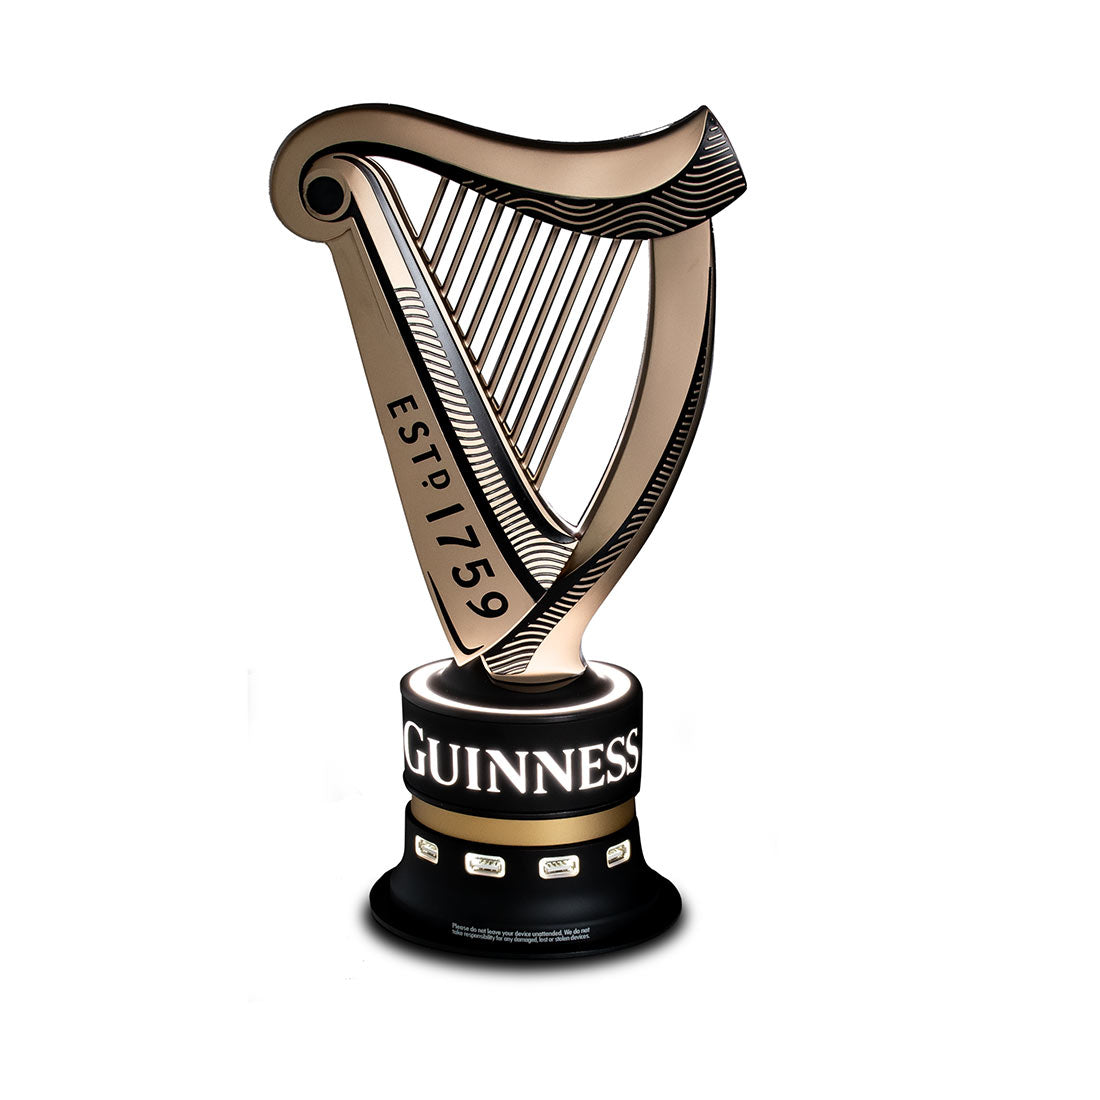 A Guinness UK Universal USB Bar Charger featuring collectable Guinness memorabilia on a white background.